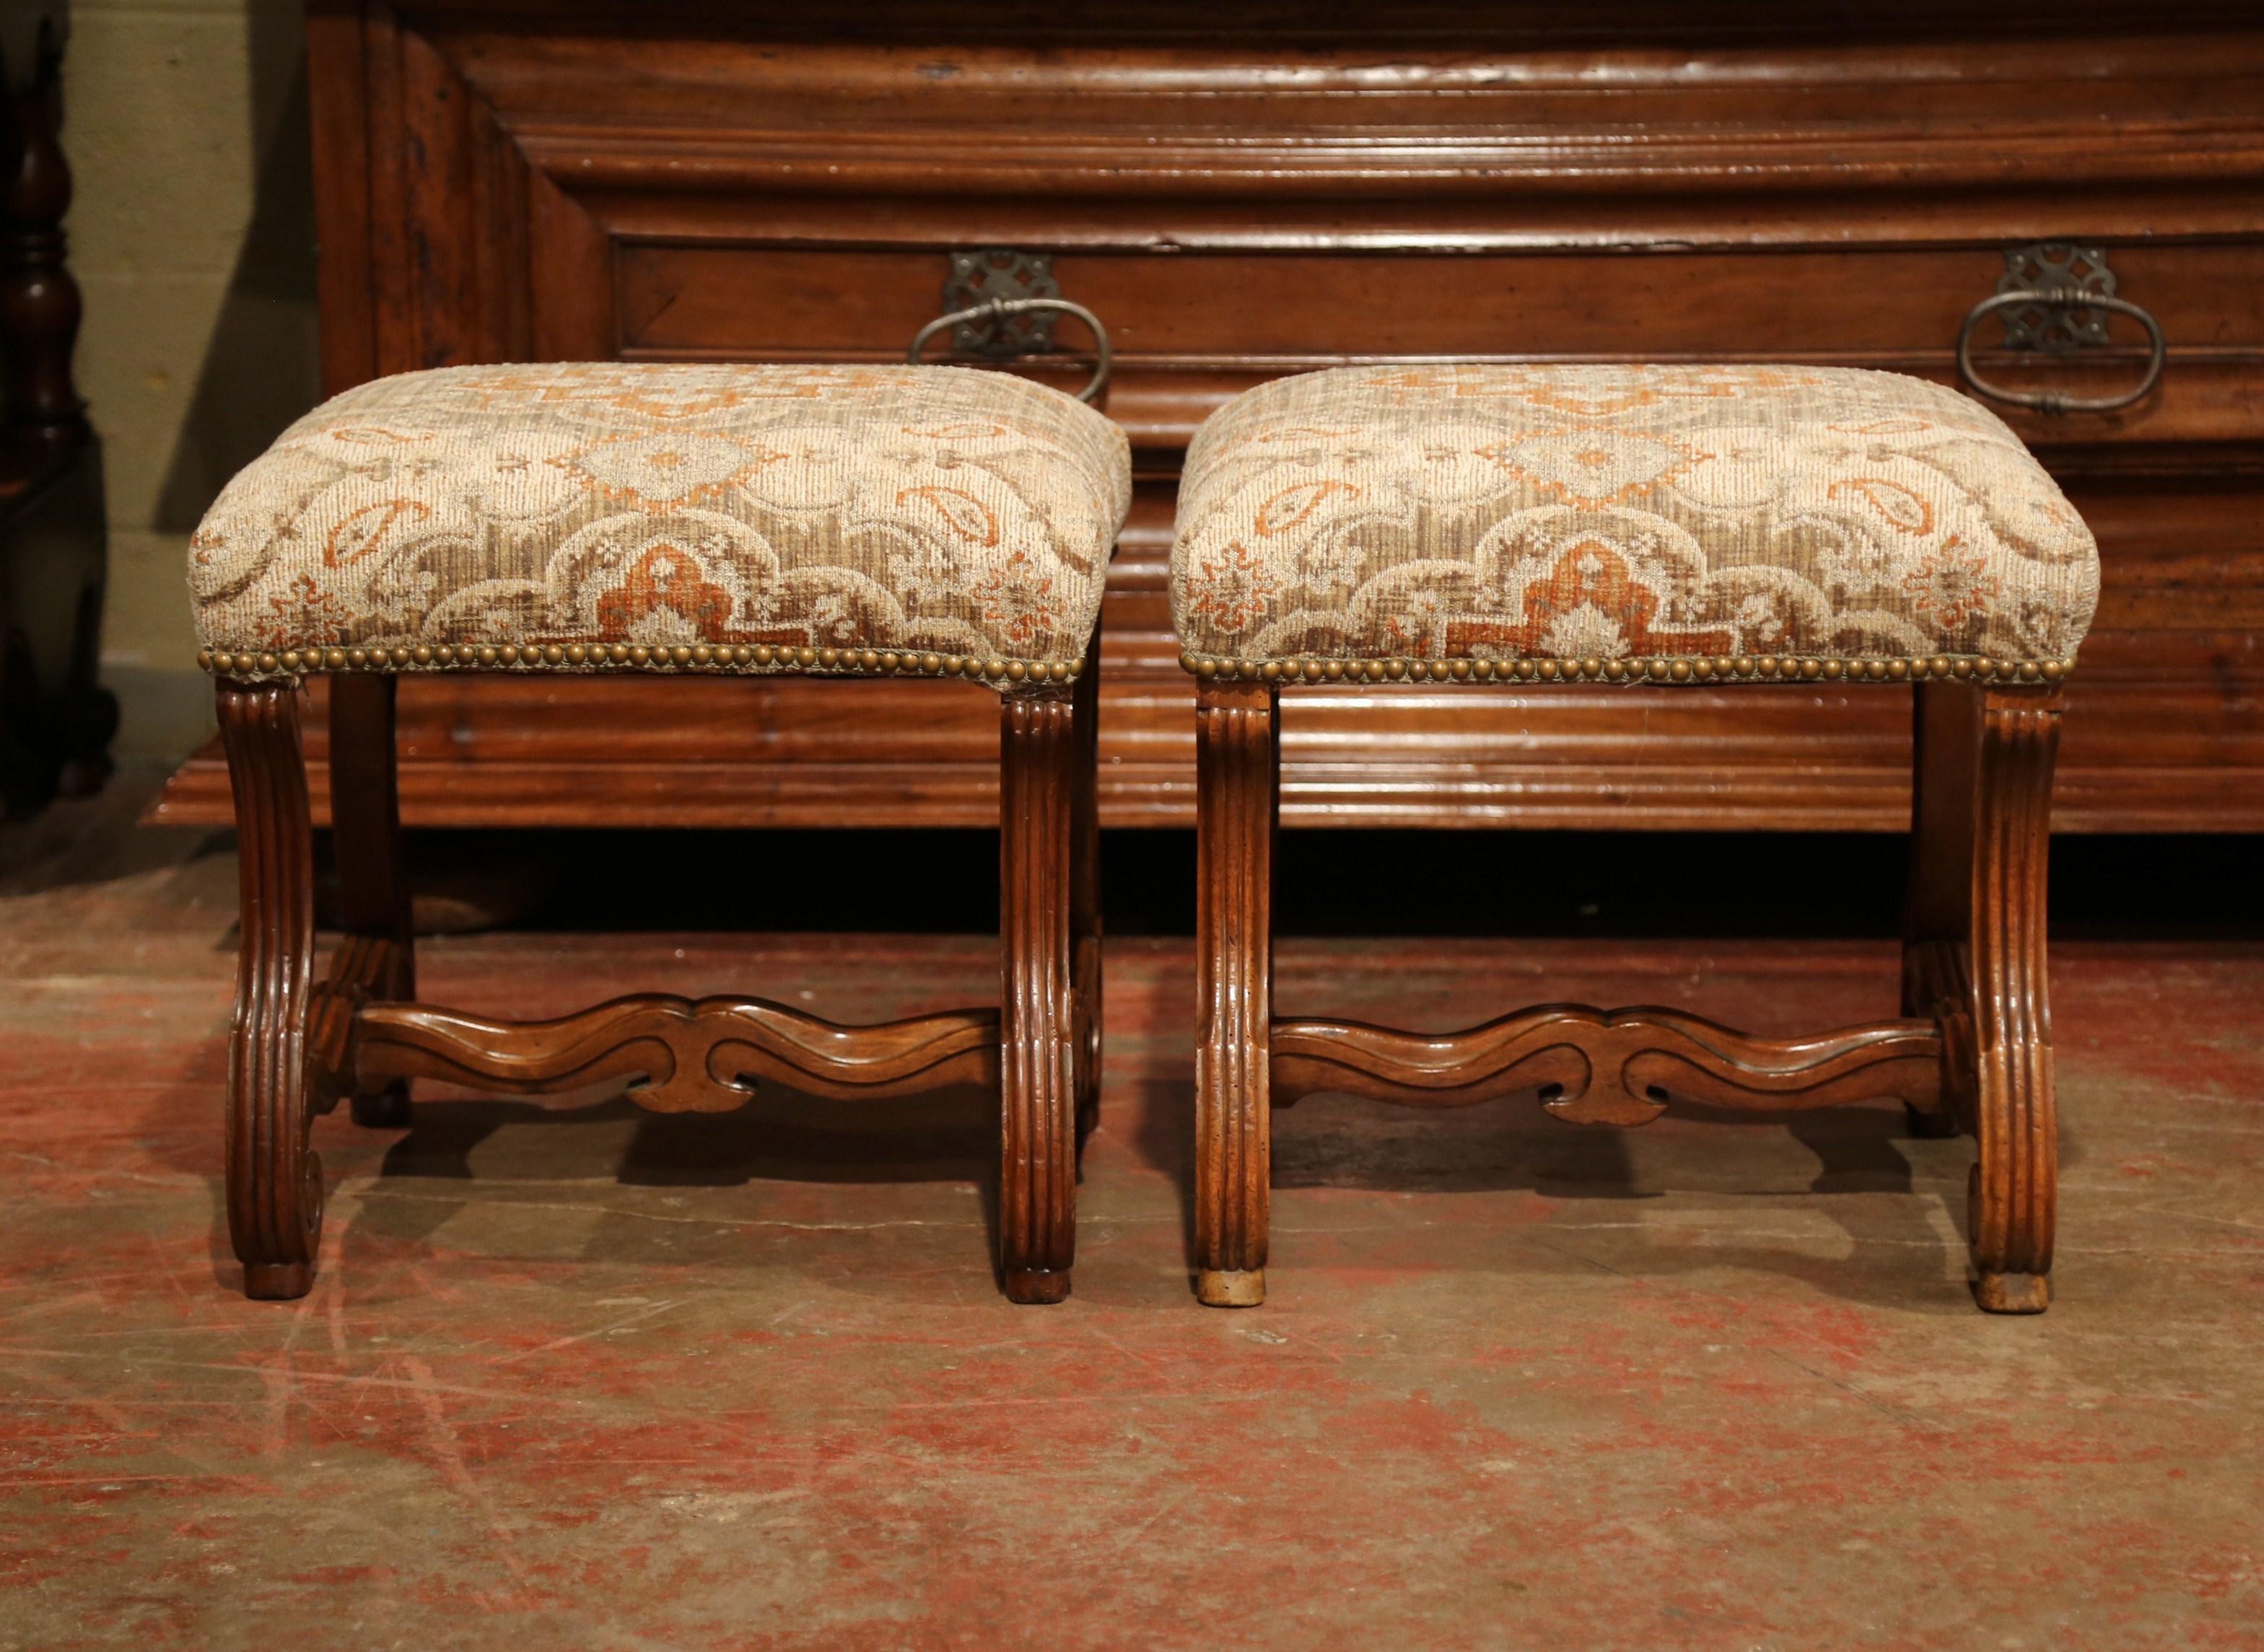 These elegant antique stools, were crafted in the Perigord region of France, circa 1860. The fruit wood seating pieces feature fine, hand-carved sheep bone scrolled legs with a decorative stretcher. The 